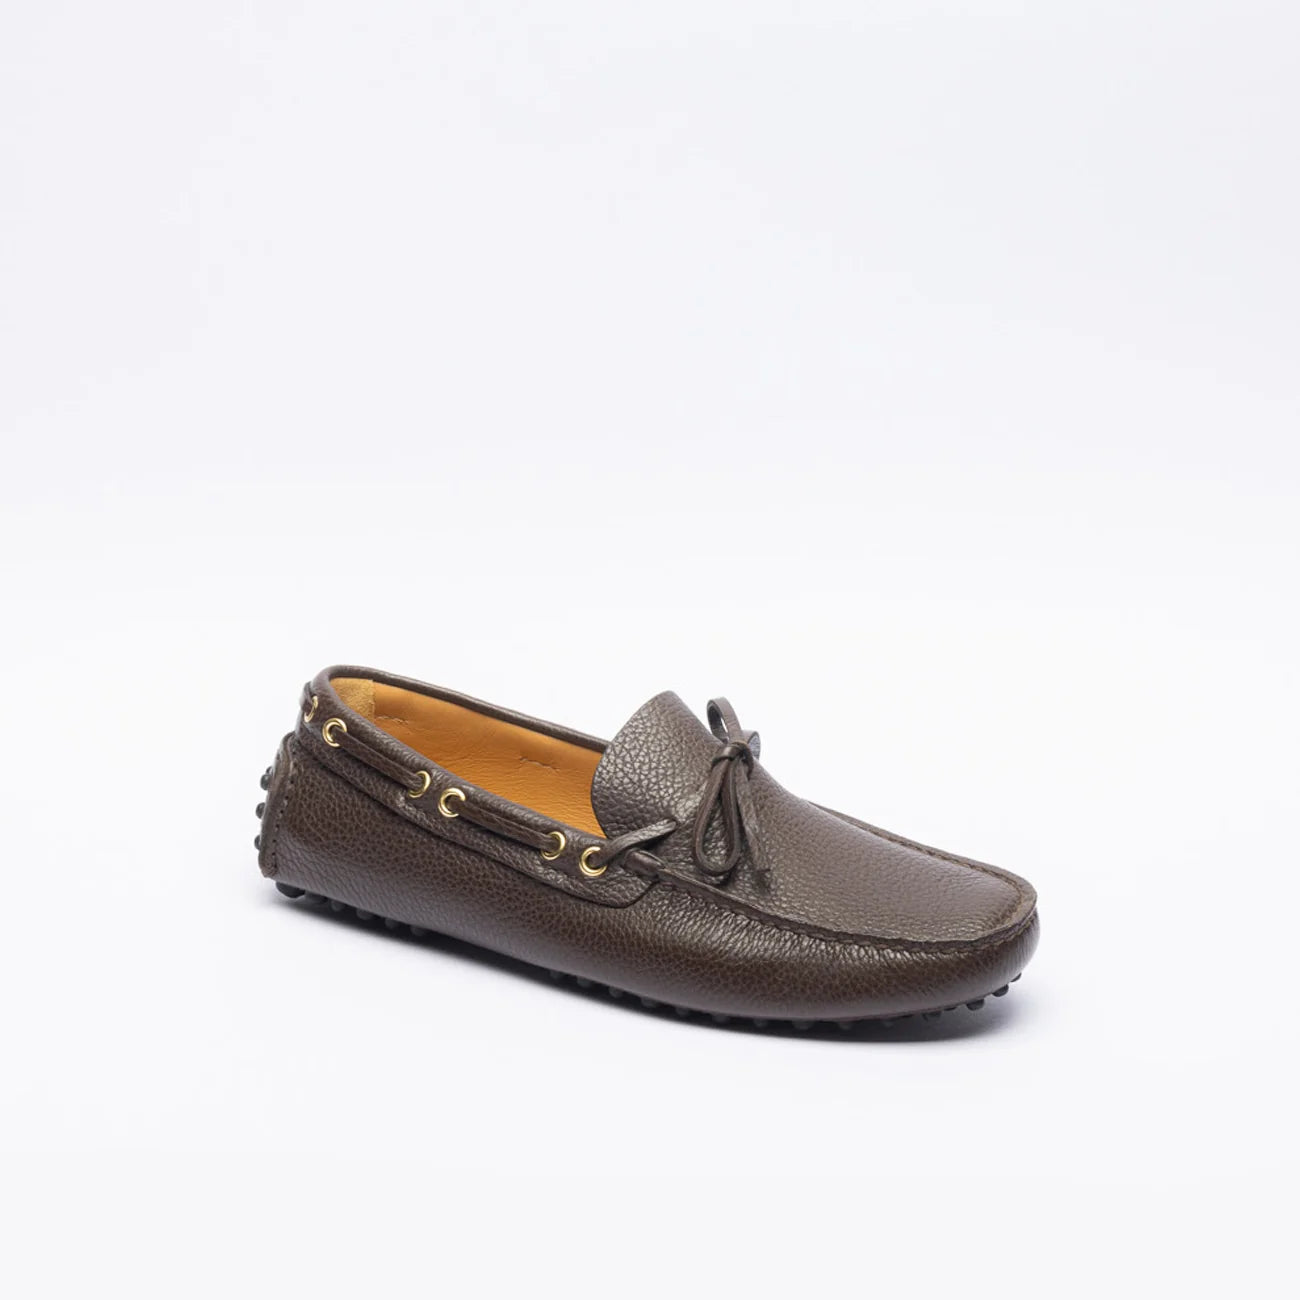 Car Shoe Driving KUD006 moccasin in brown leather